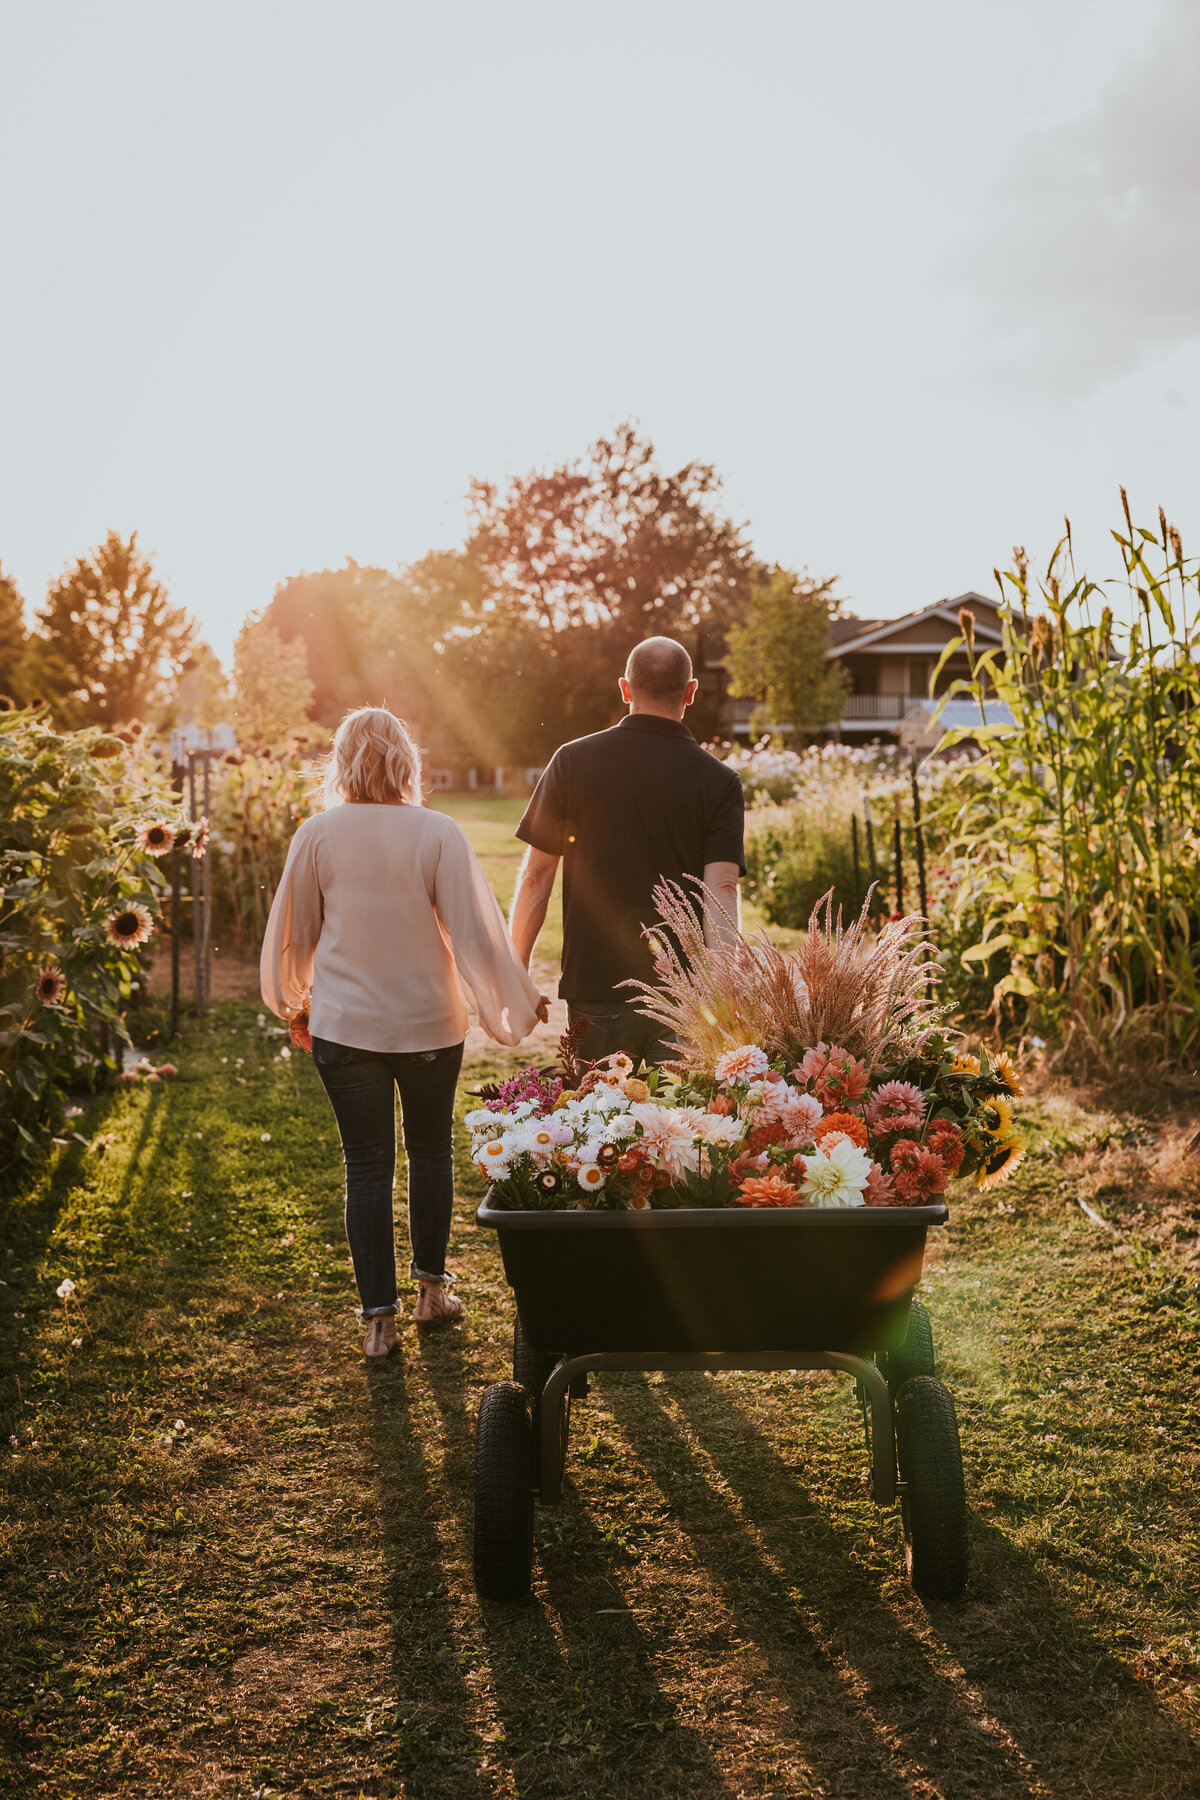 Couple holds hands while walking through garden with a wagon full of fresh flowers is in tow.